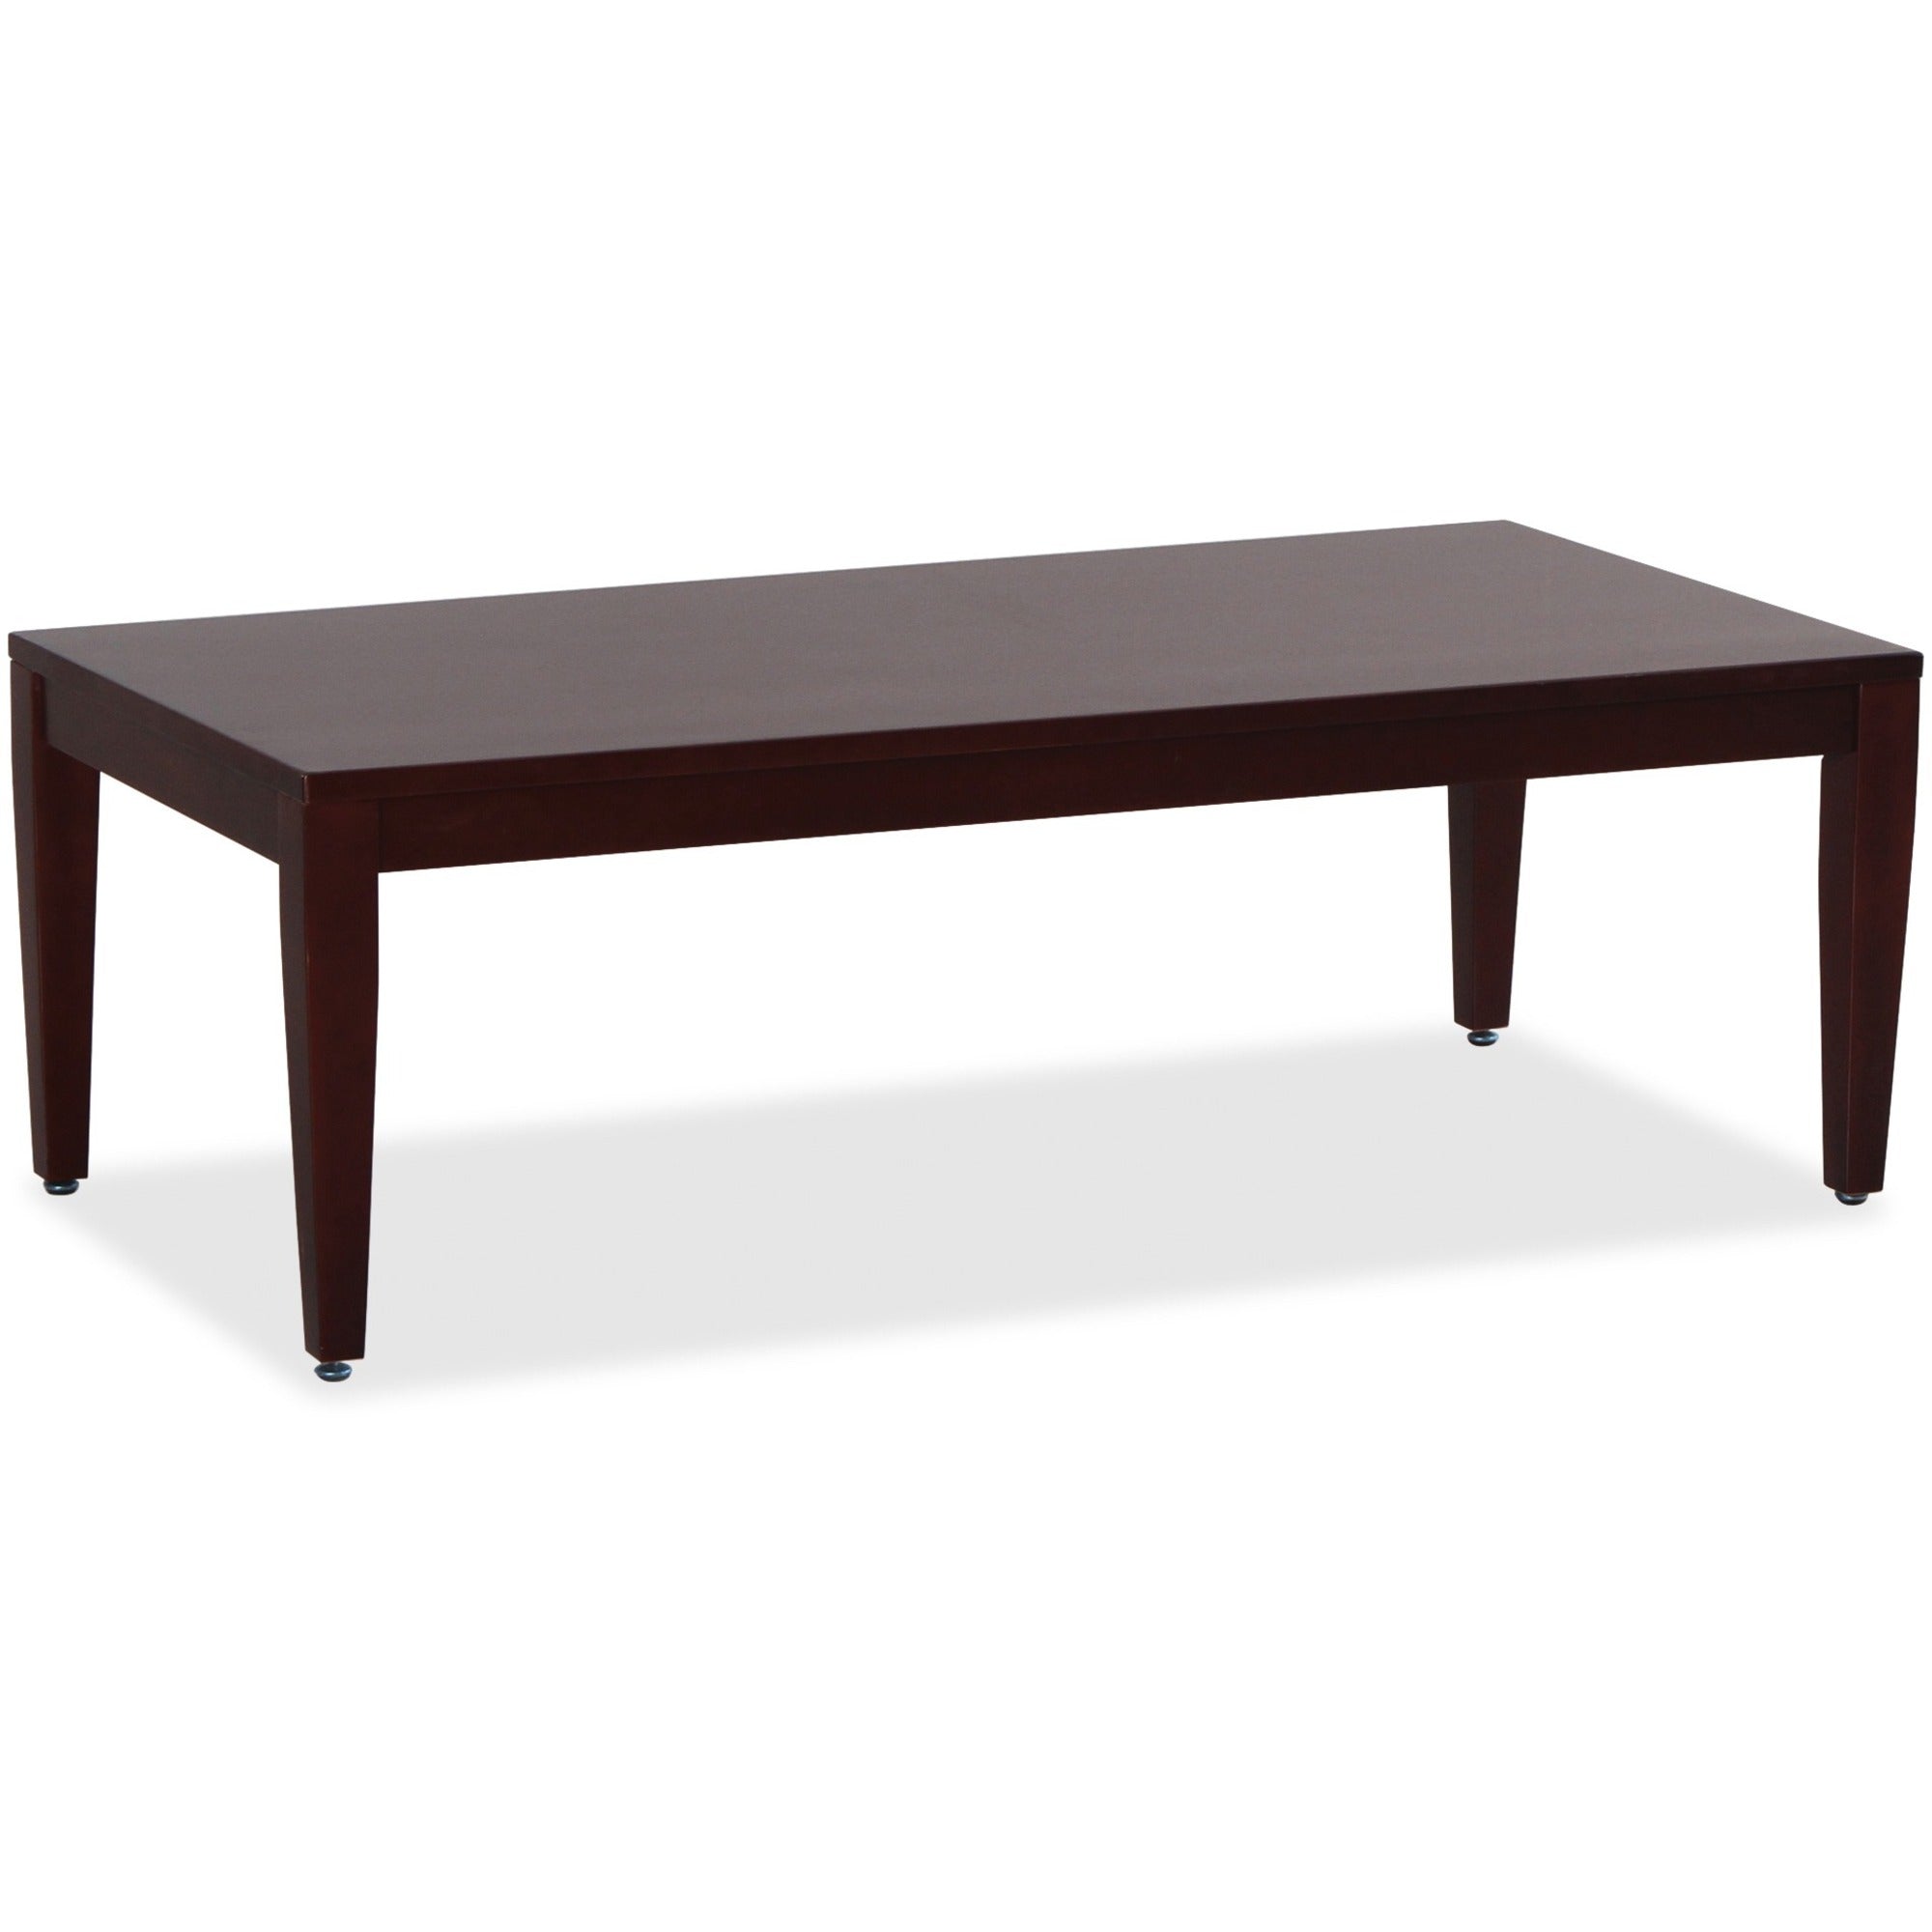 Lorell Solid Wood Coffee Table - For - Table TopRectangle Top - Four Leg Base - Traditional Style - 4 Legs - 47.50" Table Top Length x 23.60" Table Top Width x 42.50" Table Top Depth - 15.75" Height x 23.63" Width x 47.25" Depth - Assembly Required - - 